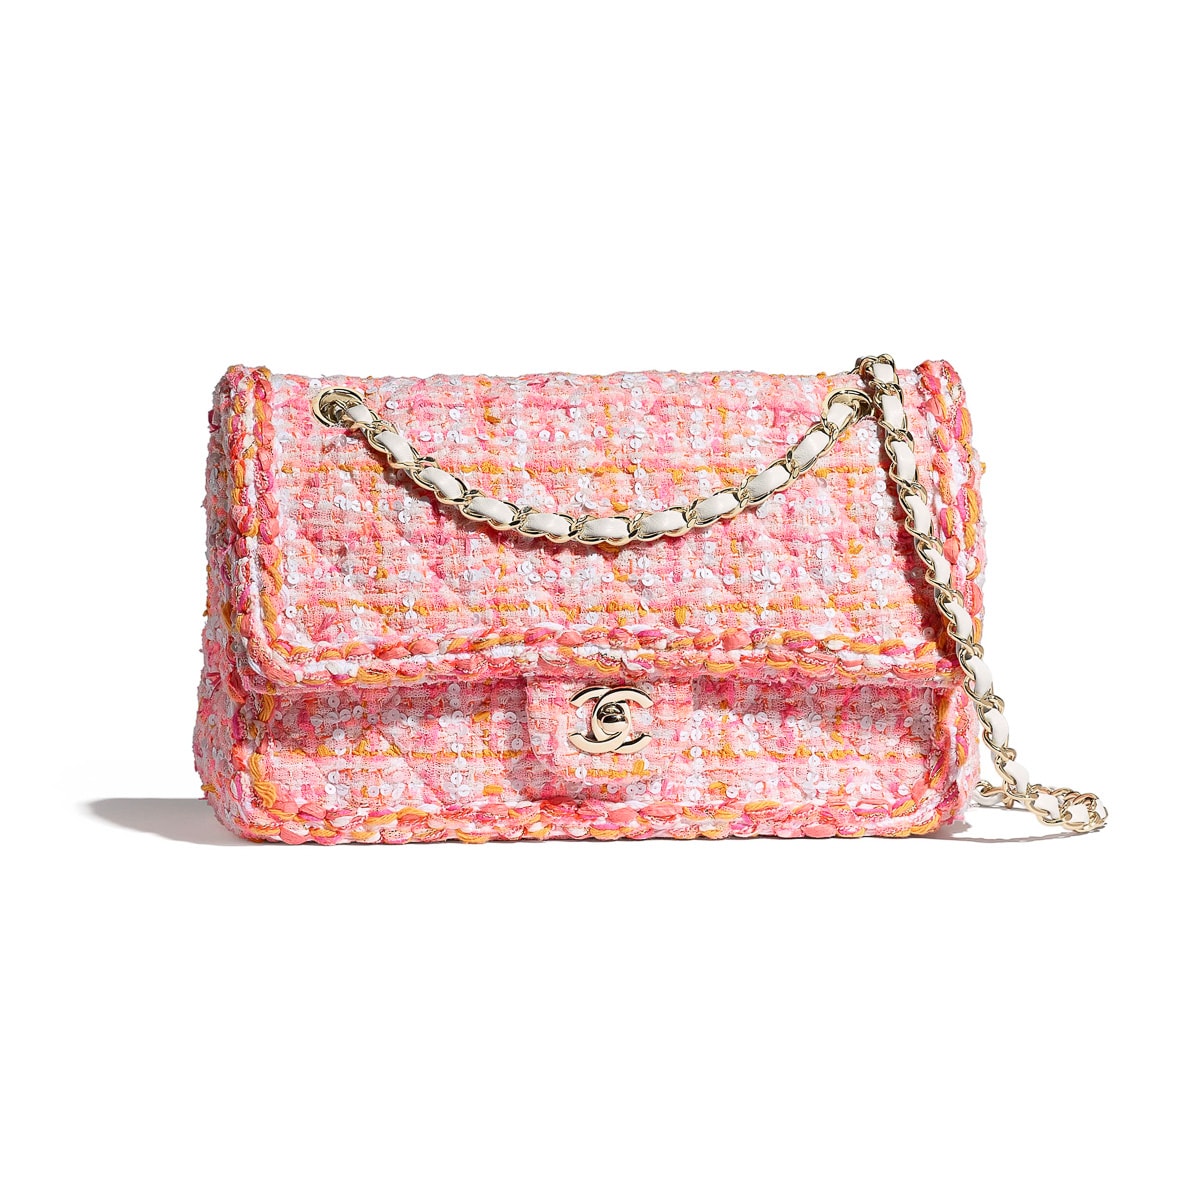 We&#39;ve Got Over 100 Pics + Prices of Chanel’s Nautical-Inspired Cruise 2019 Bags - PurseBlog